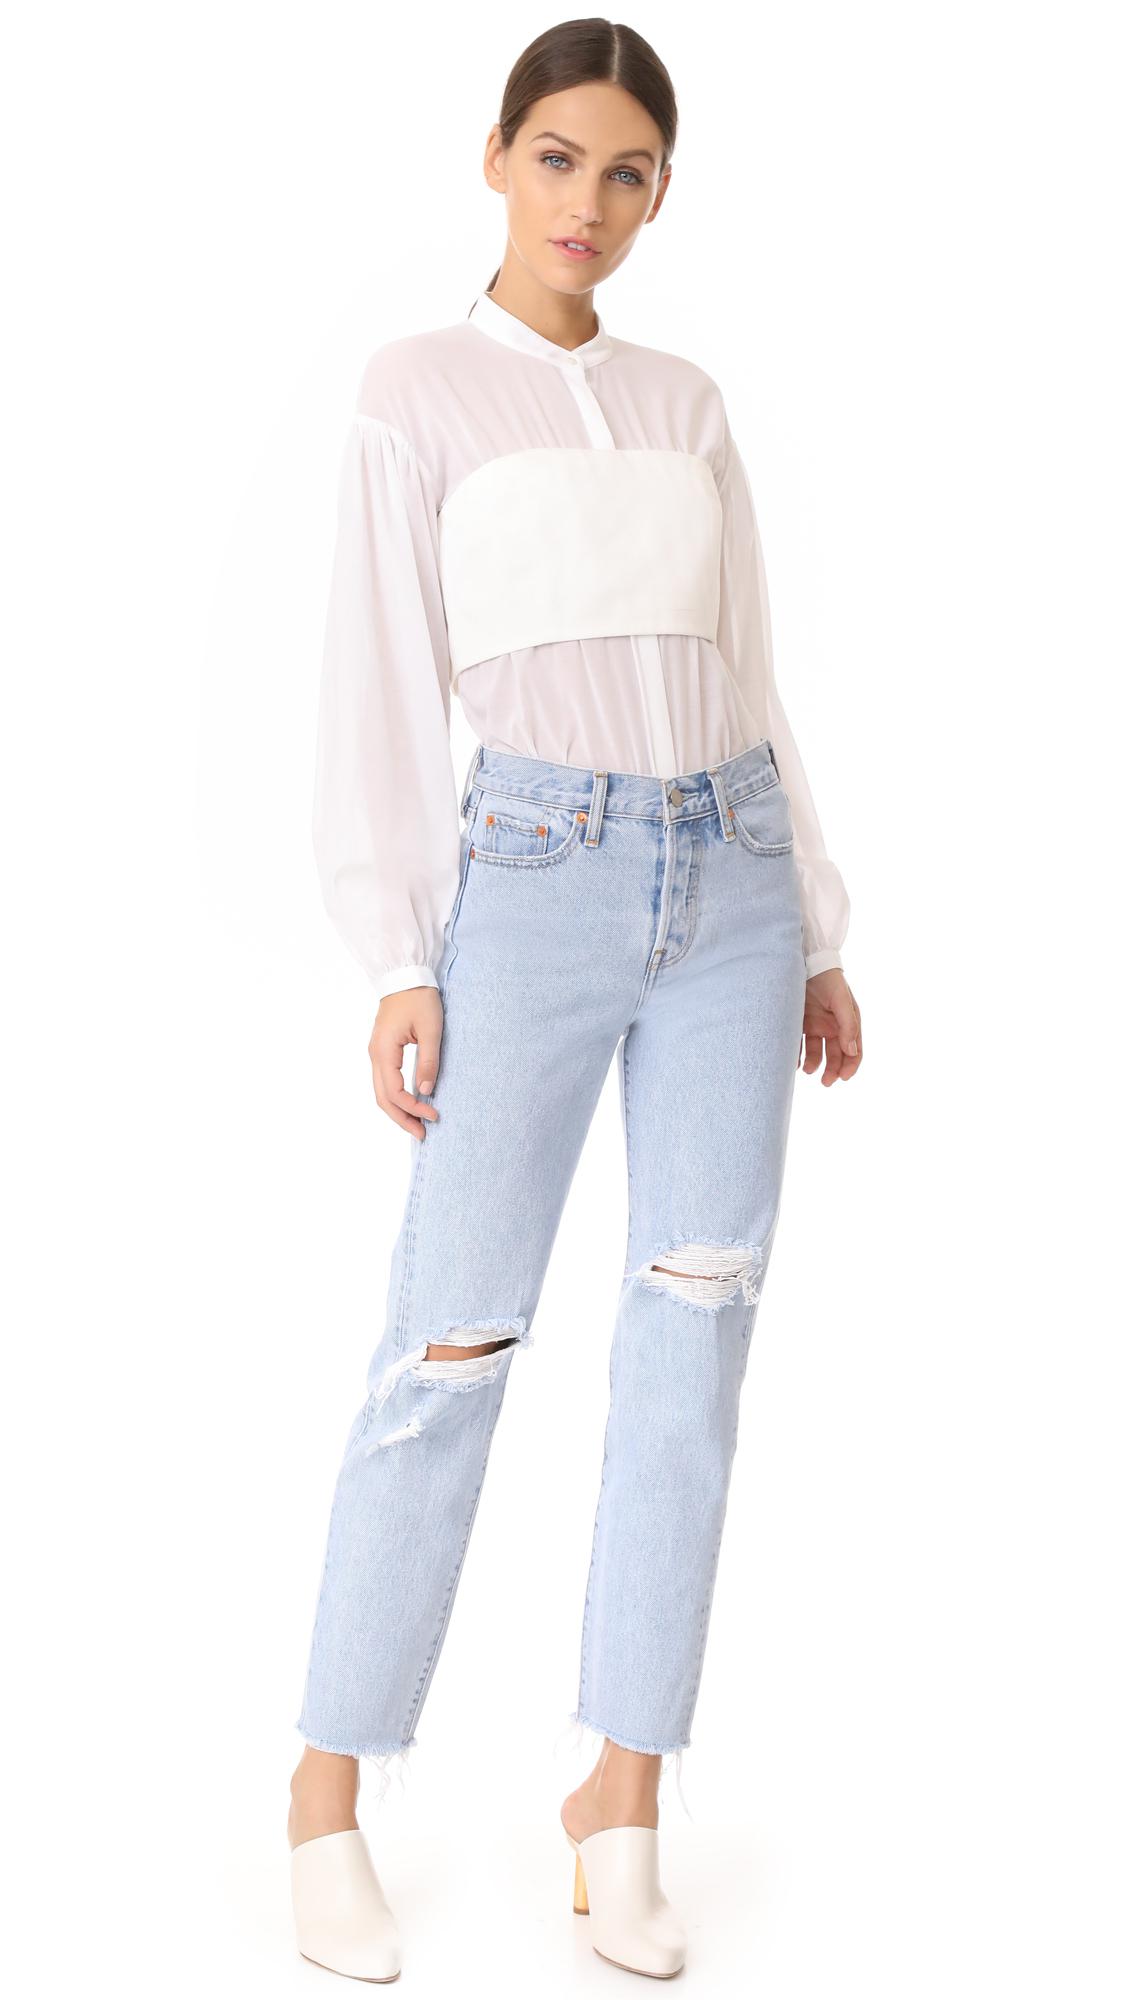 Lyst - 3.1 Phillip Lim Long Sleeve Corset Top in White